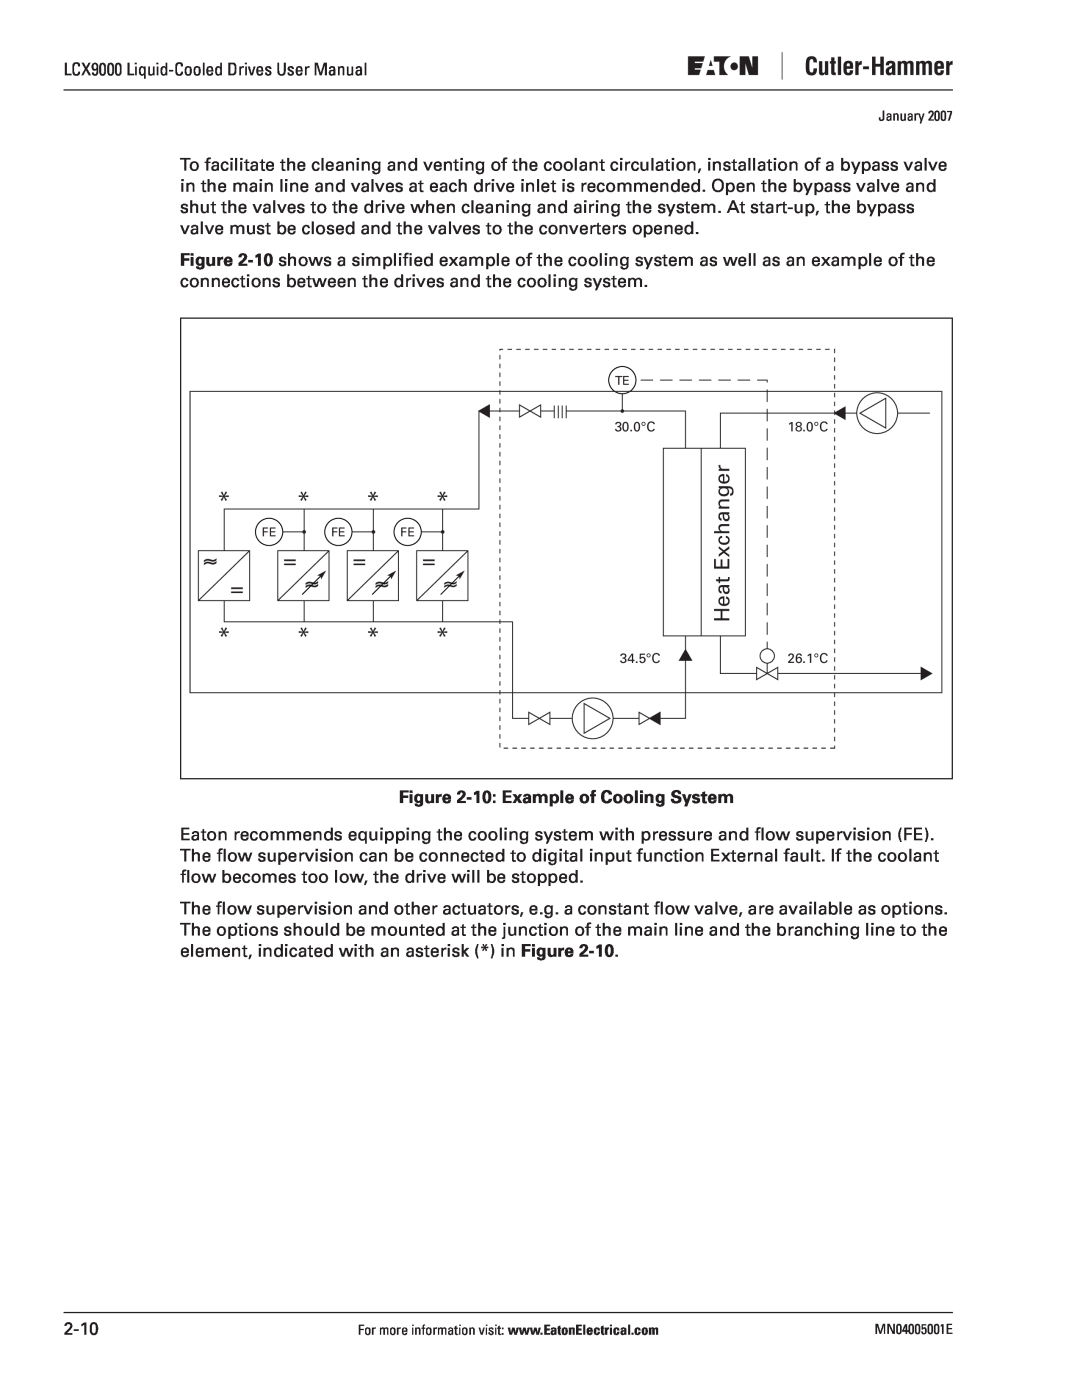 J. T. Eaton LCX9000 user manual 10 Example of Cooling System, Exchanger, Heat 